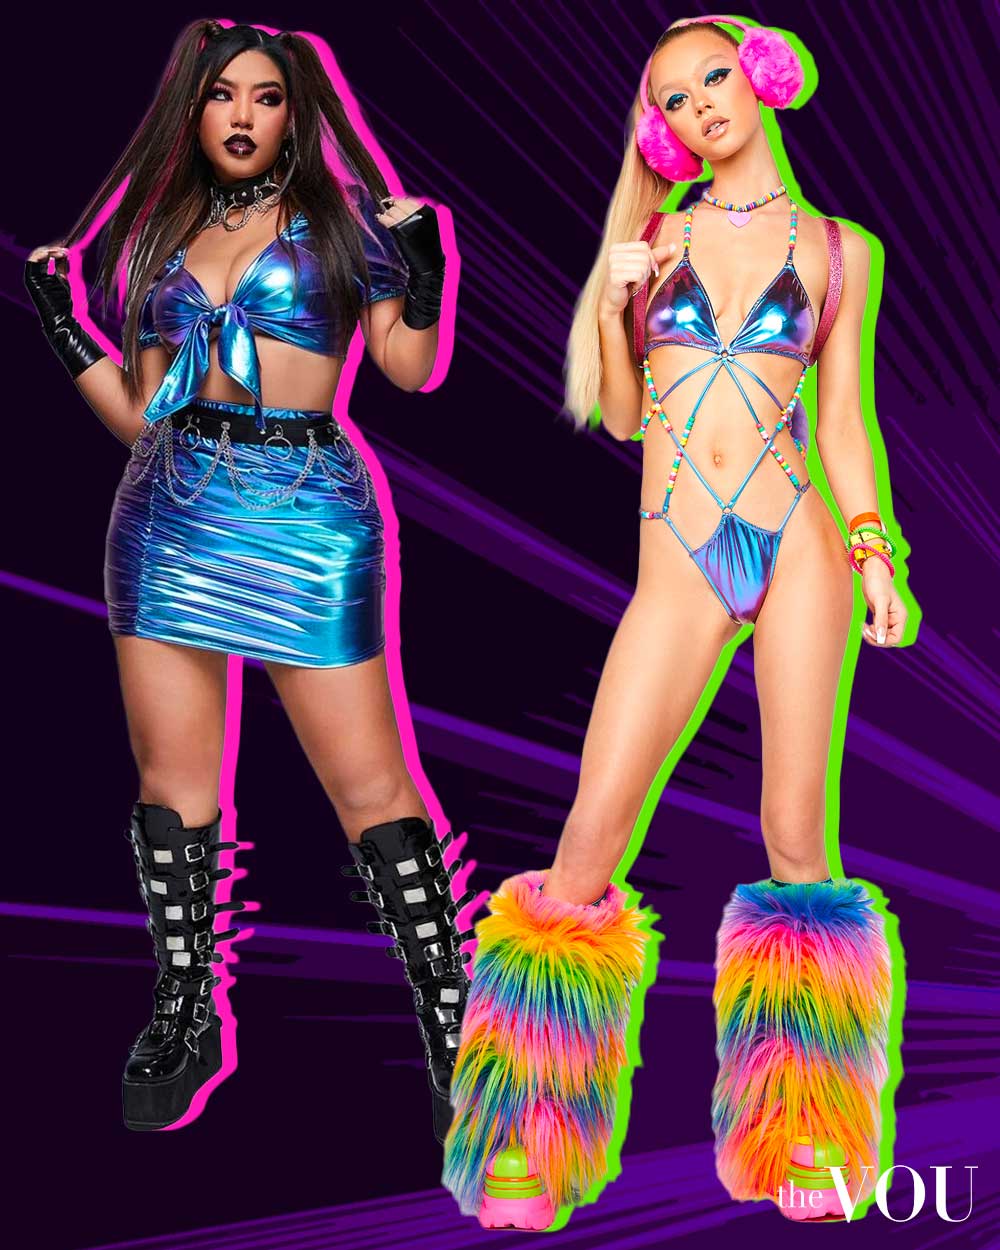 https://thevou.com/app/uploads/2022/05/Rave-Outfits-The-VOU-Rave-Feature-01.jpg